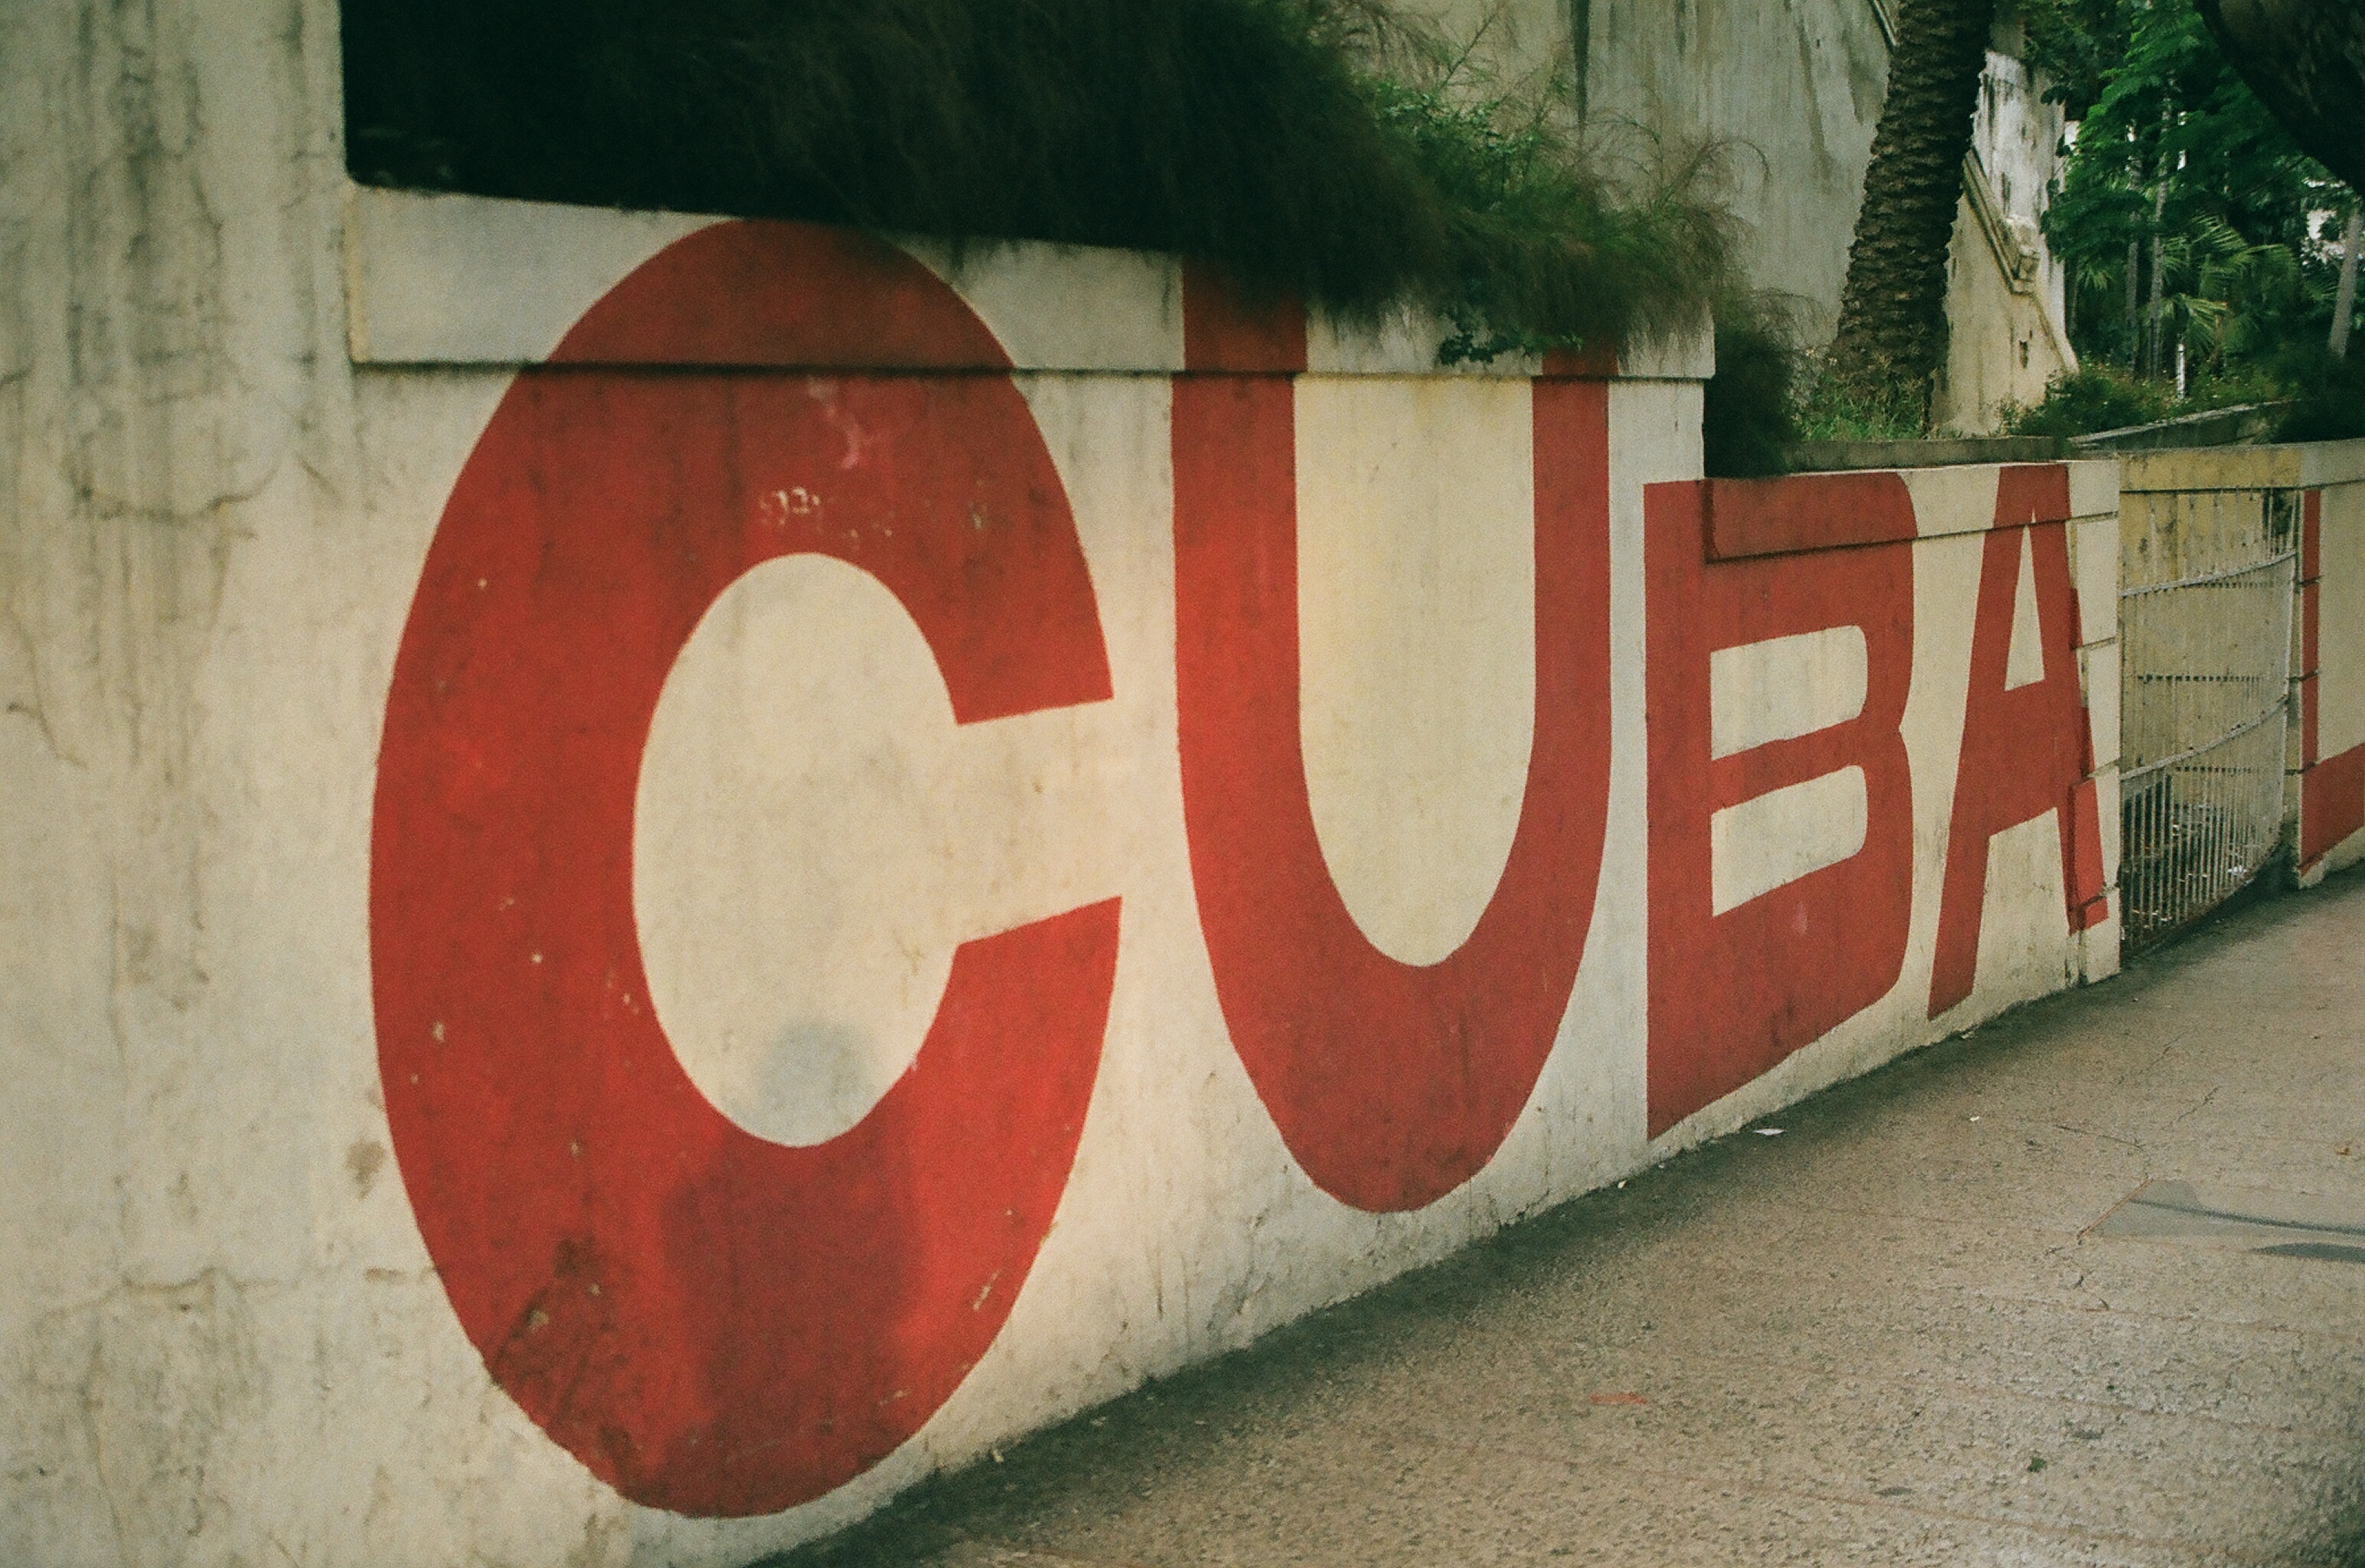 The word "Cuba" painted in red block letters on a wall in Havana.